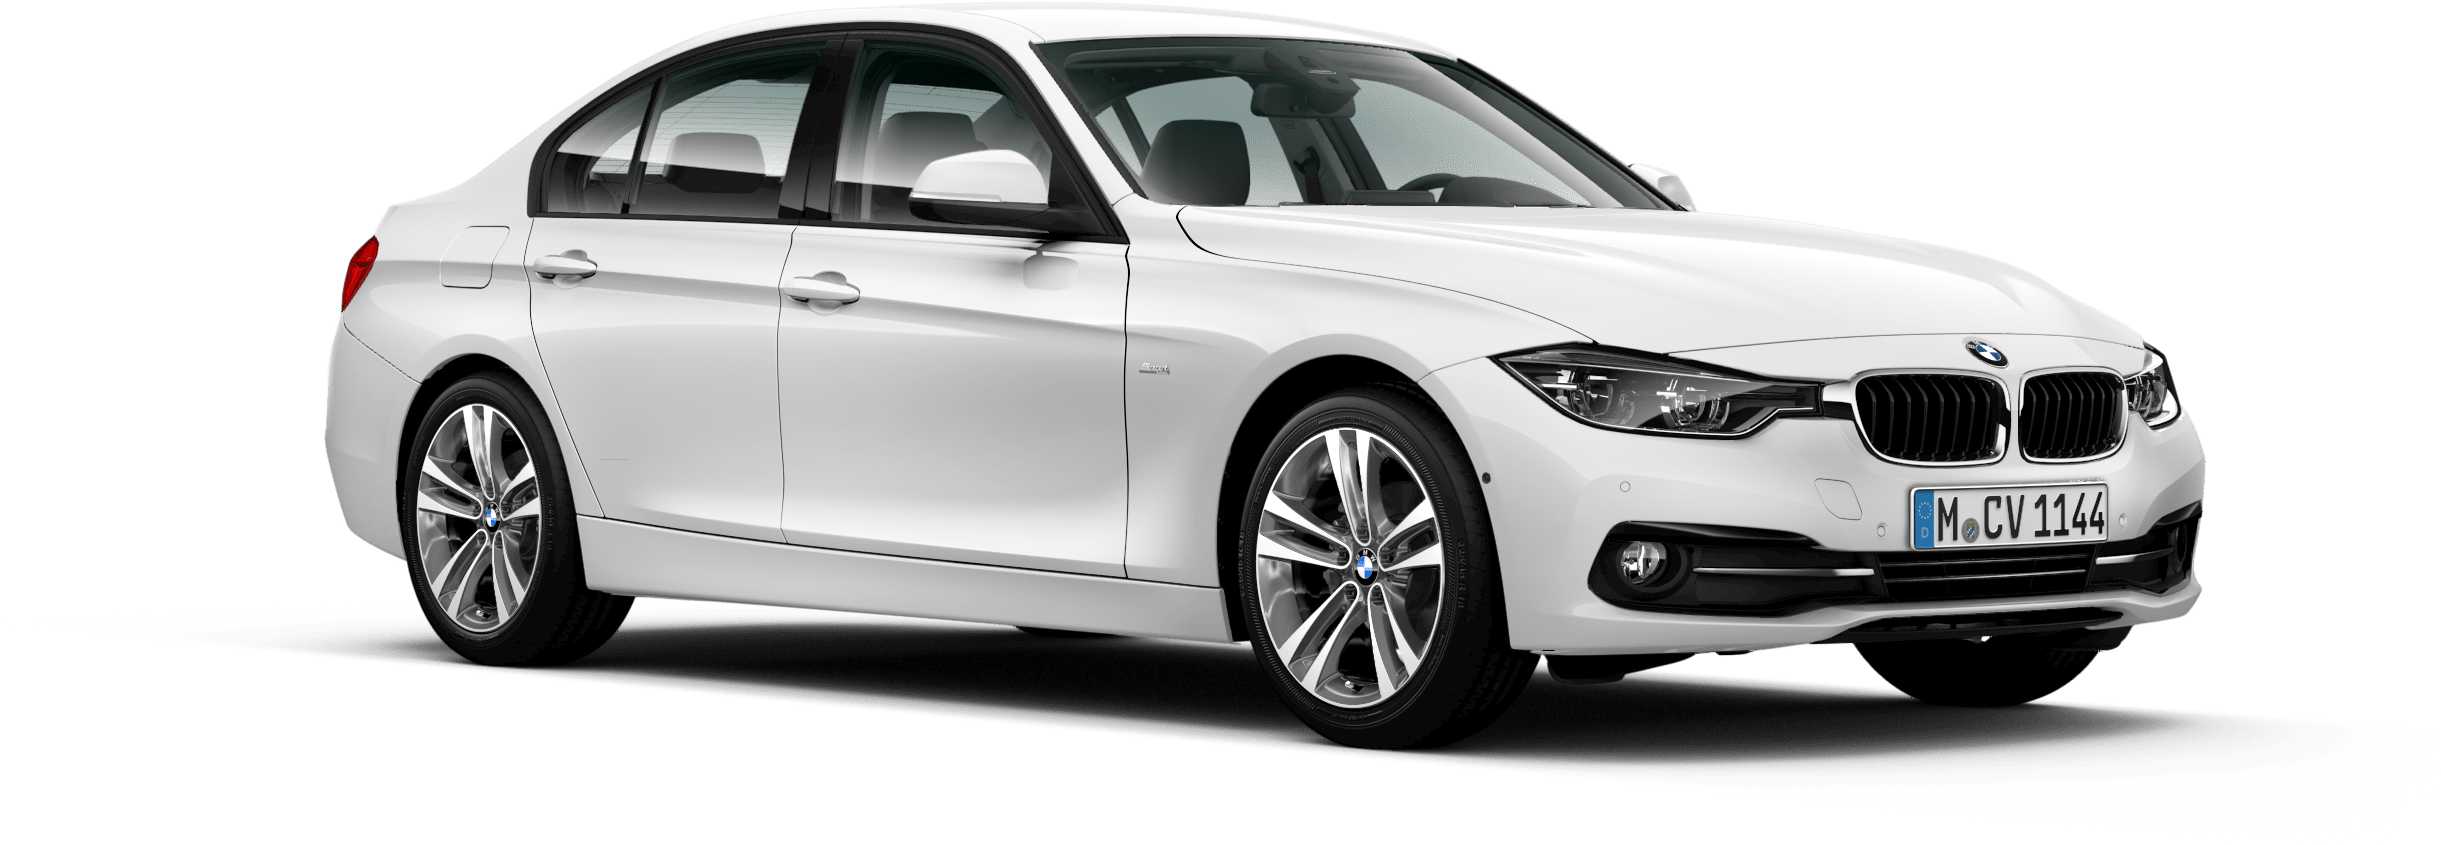 3 Series Sedan Bmw 320i 3 Series Clipart Large Size Png Image PikPng